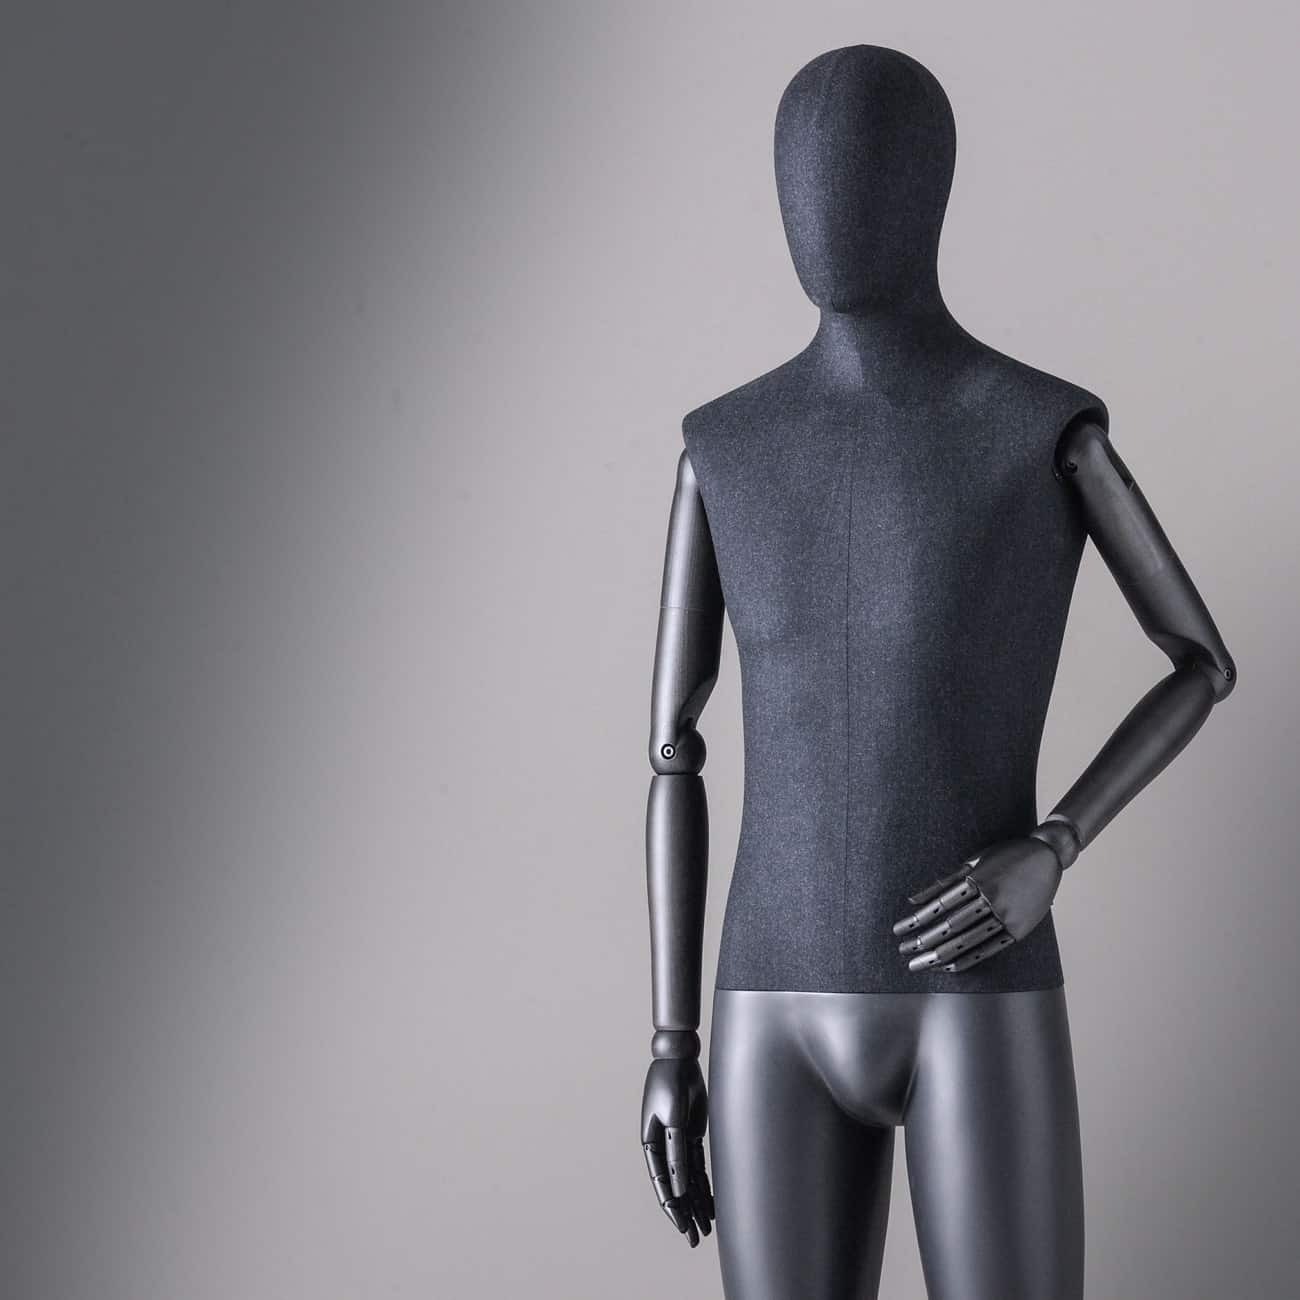 Sartorial Men | Male mannequin with fixed legs and articulated arms